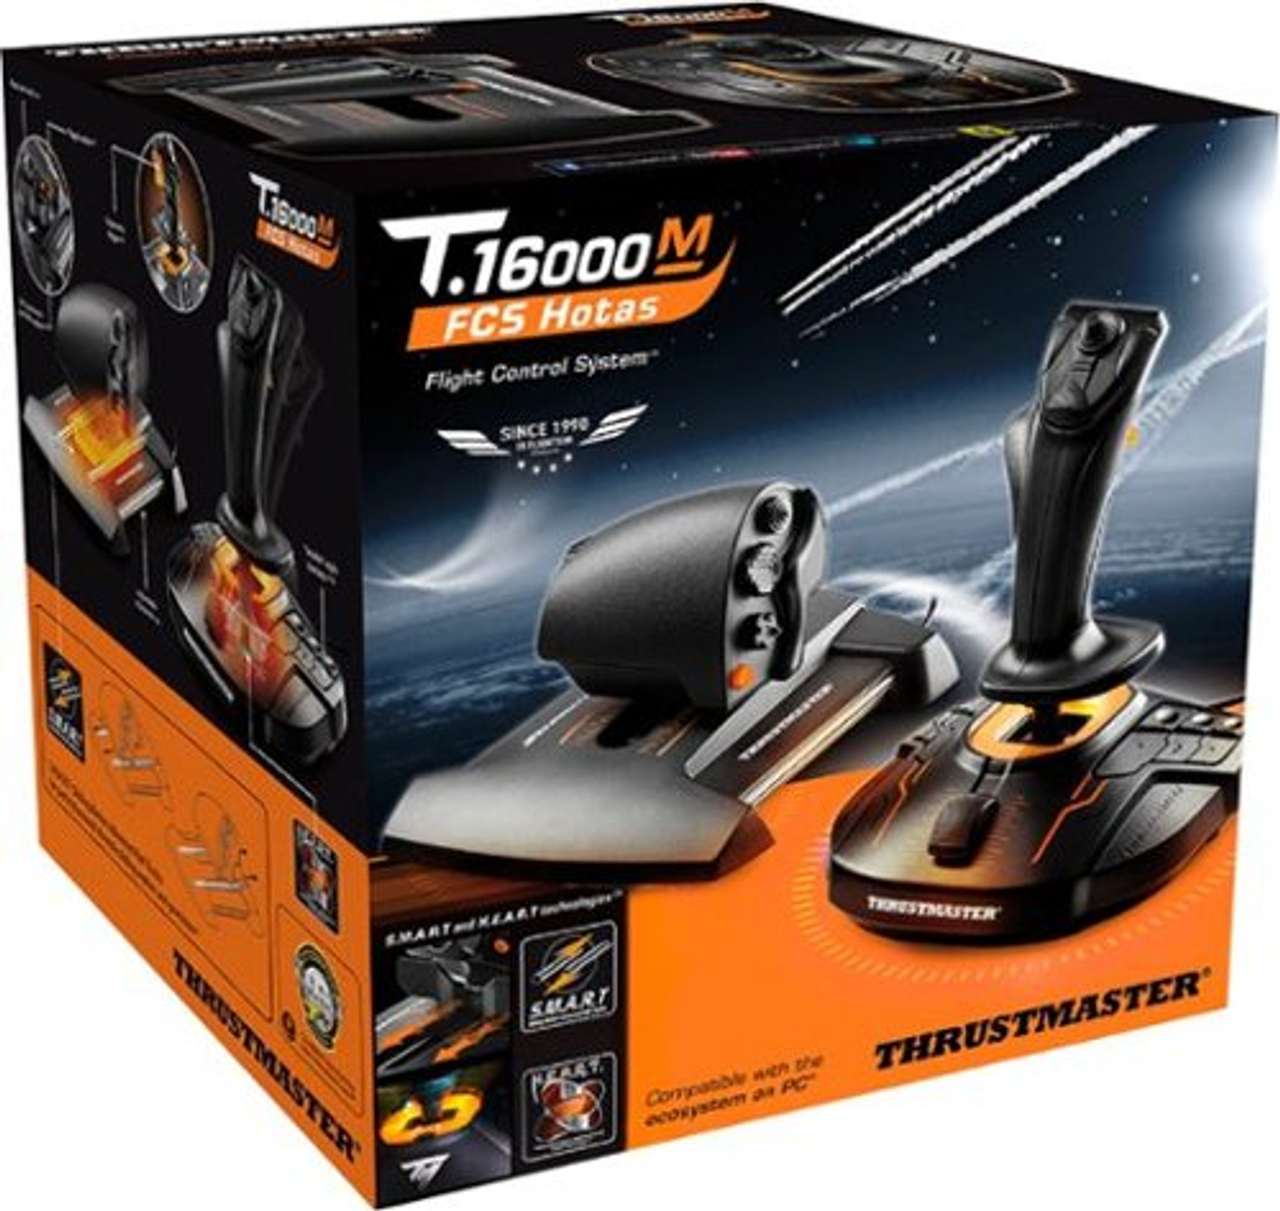 Thrustmaster - T16000M FCS HOTAS for PC